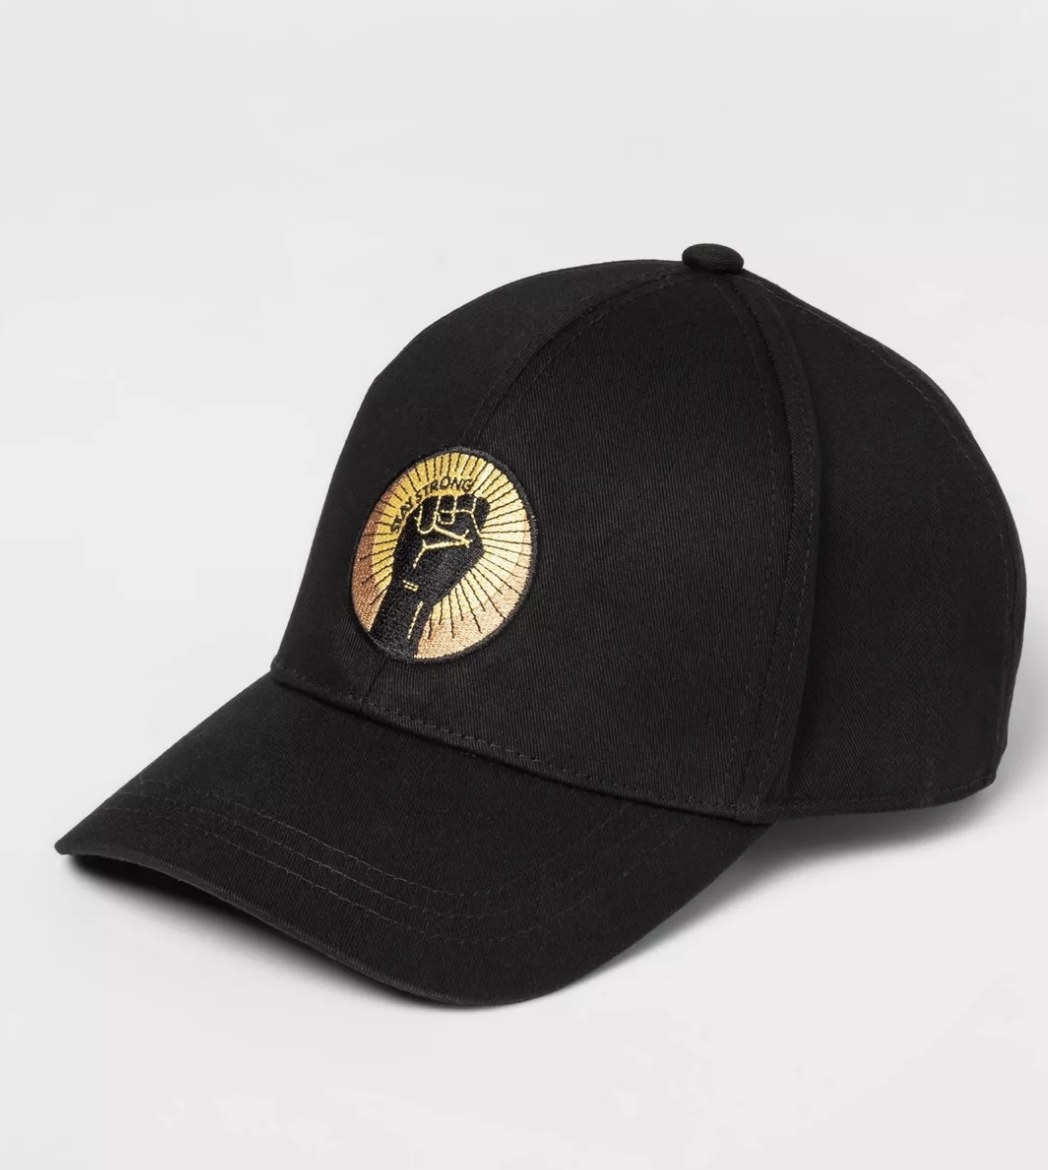 The black cotton hat has a gold circular logo with a black fist and &quot;STAY STRONG&quot; written above